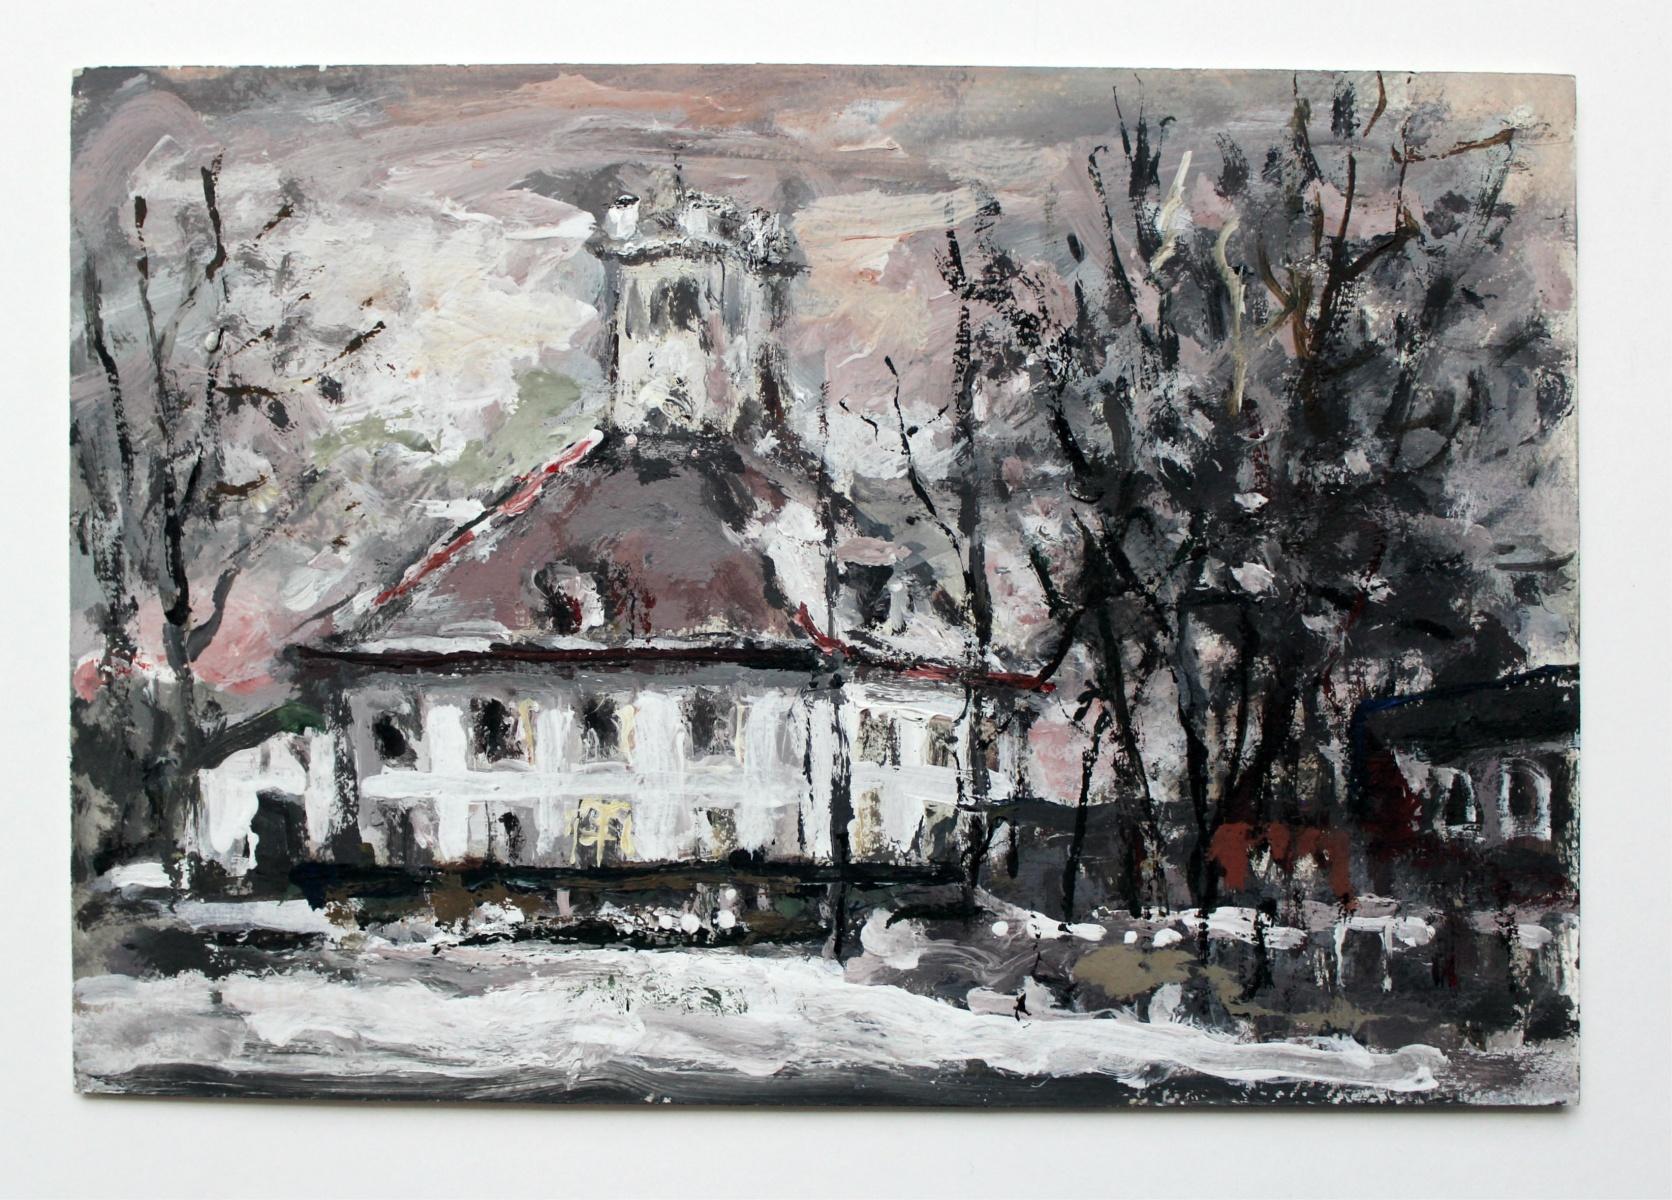 Suburbs - XXI century, Oil on canvas, Figurative, Landscape - Painting by Magdalena Spasowicz